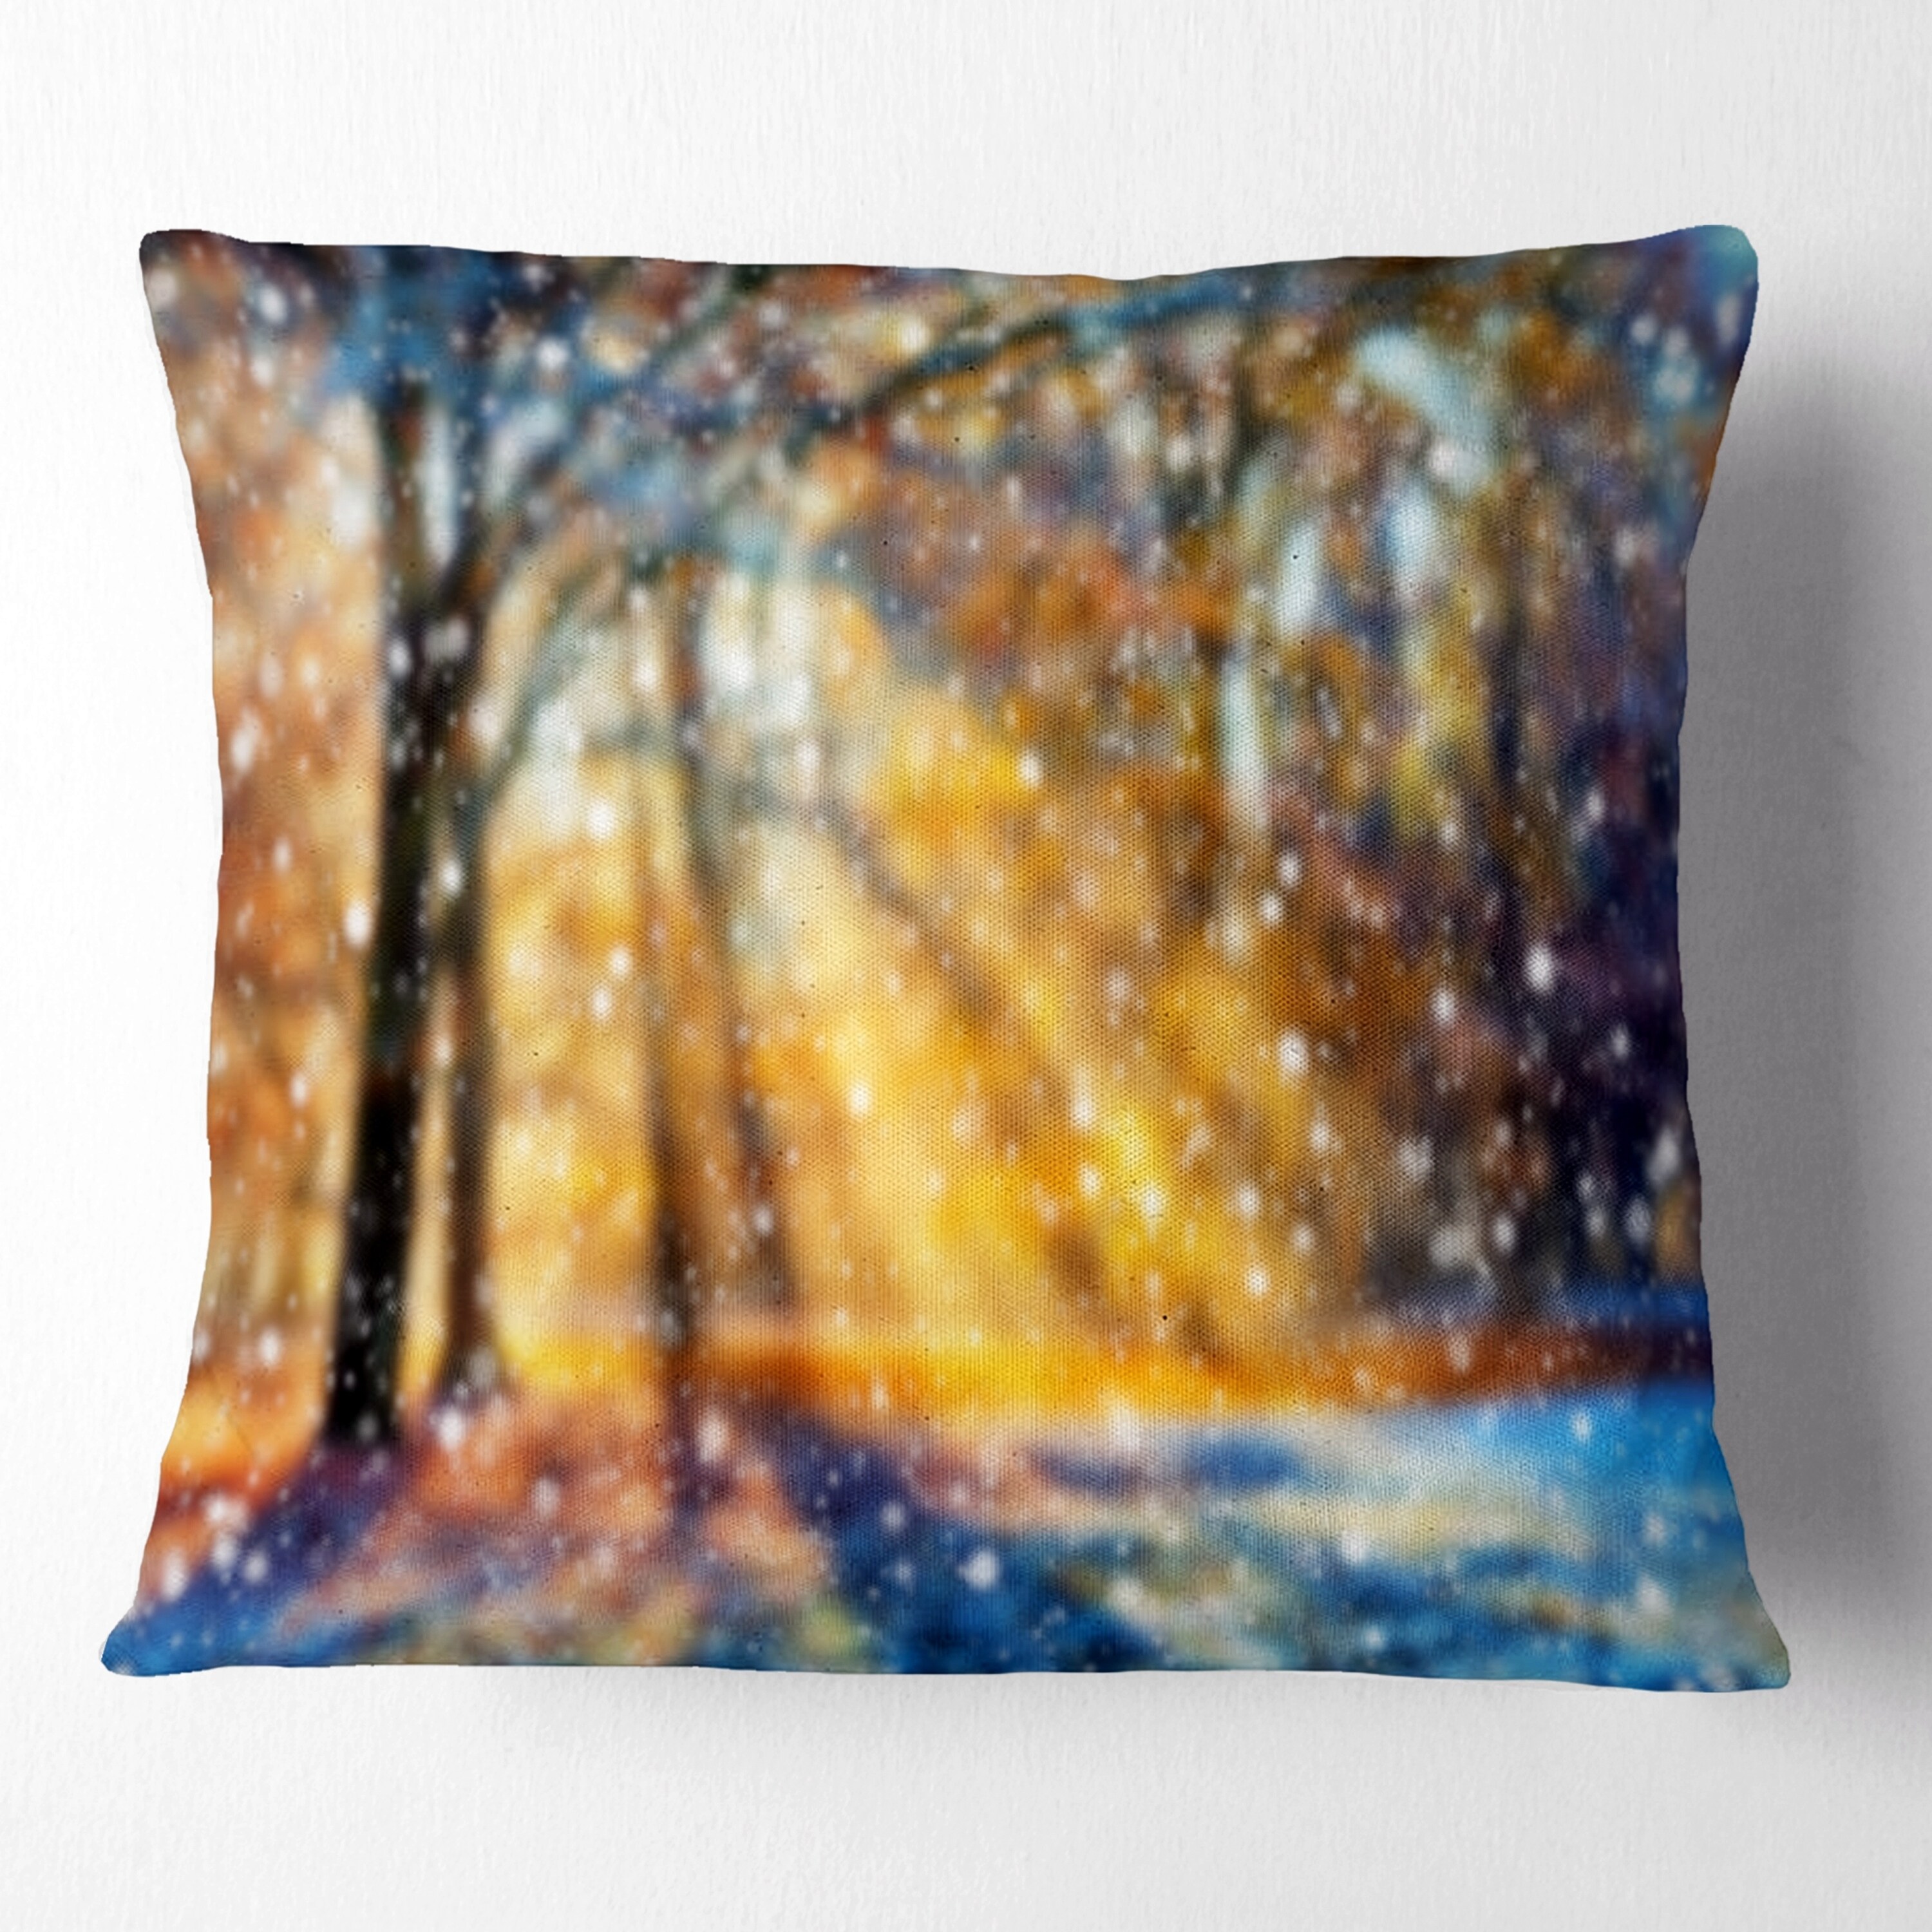 https://ak1.ostkcdn.com/images/products/20952445/Designart-Blur-Winter-with-Snow-Flakes-Landscape-Printed-Throw-Pillow-c8a2f6be-86ef-4b54-8740-53f061e38051.jpg